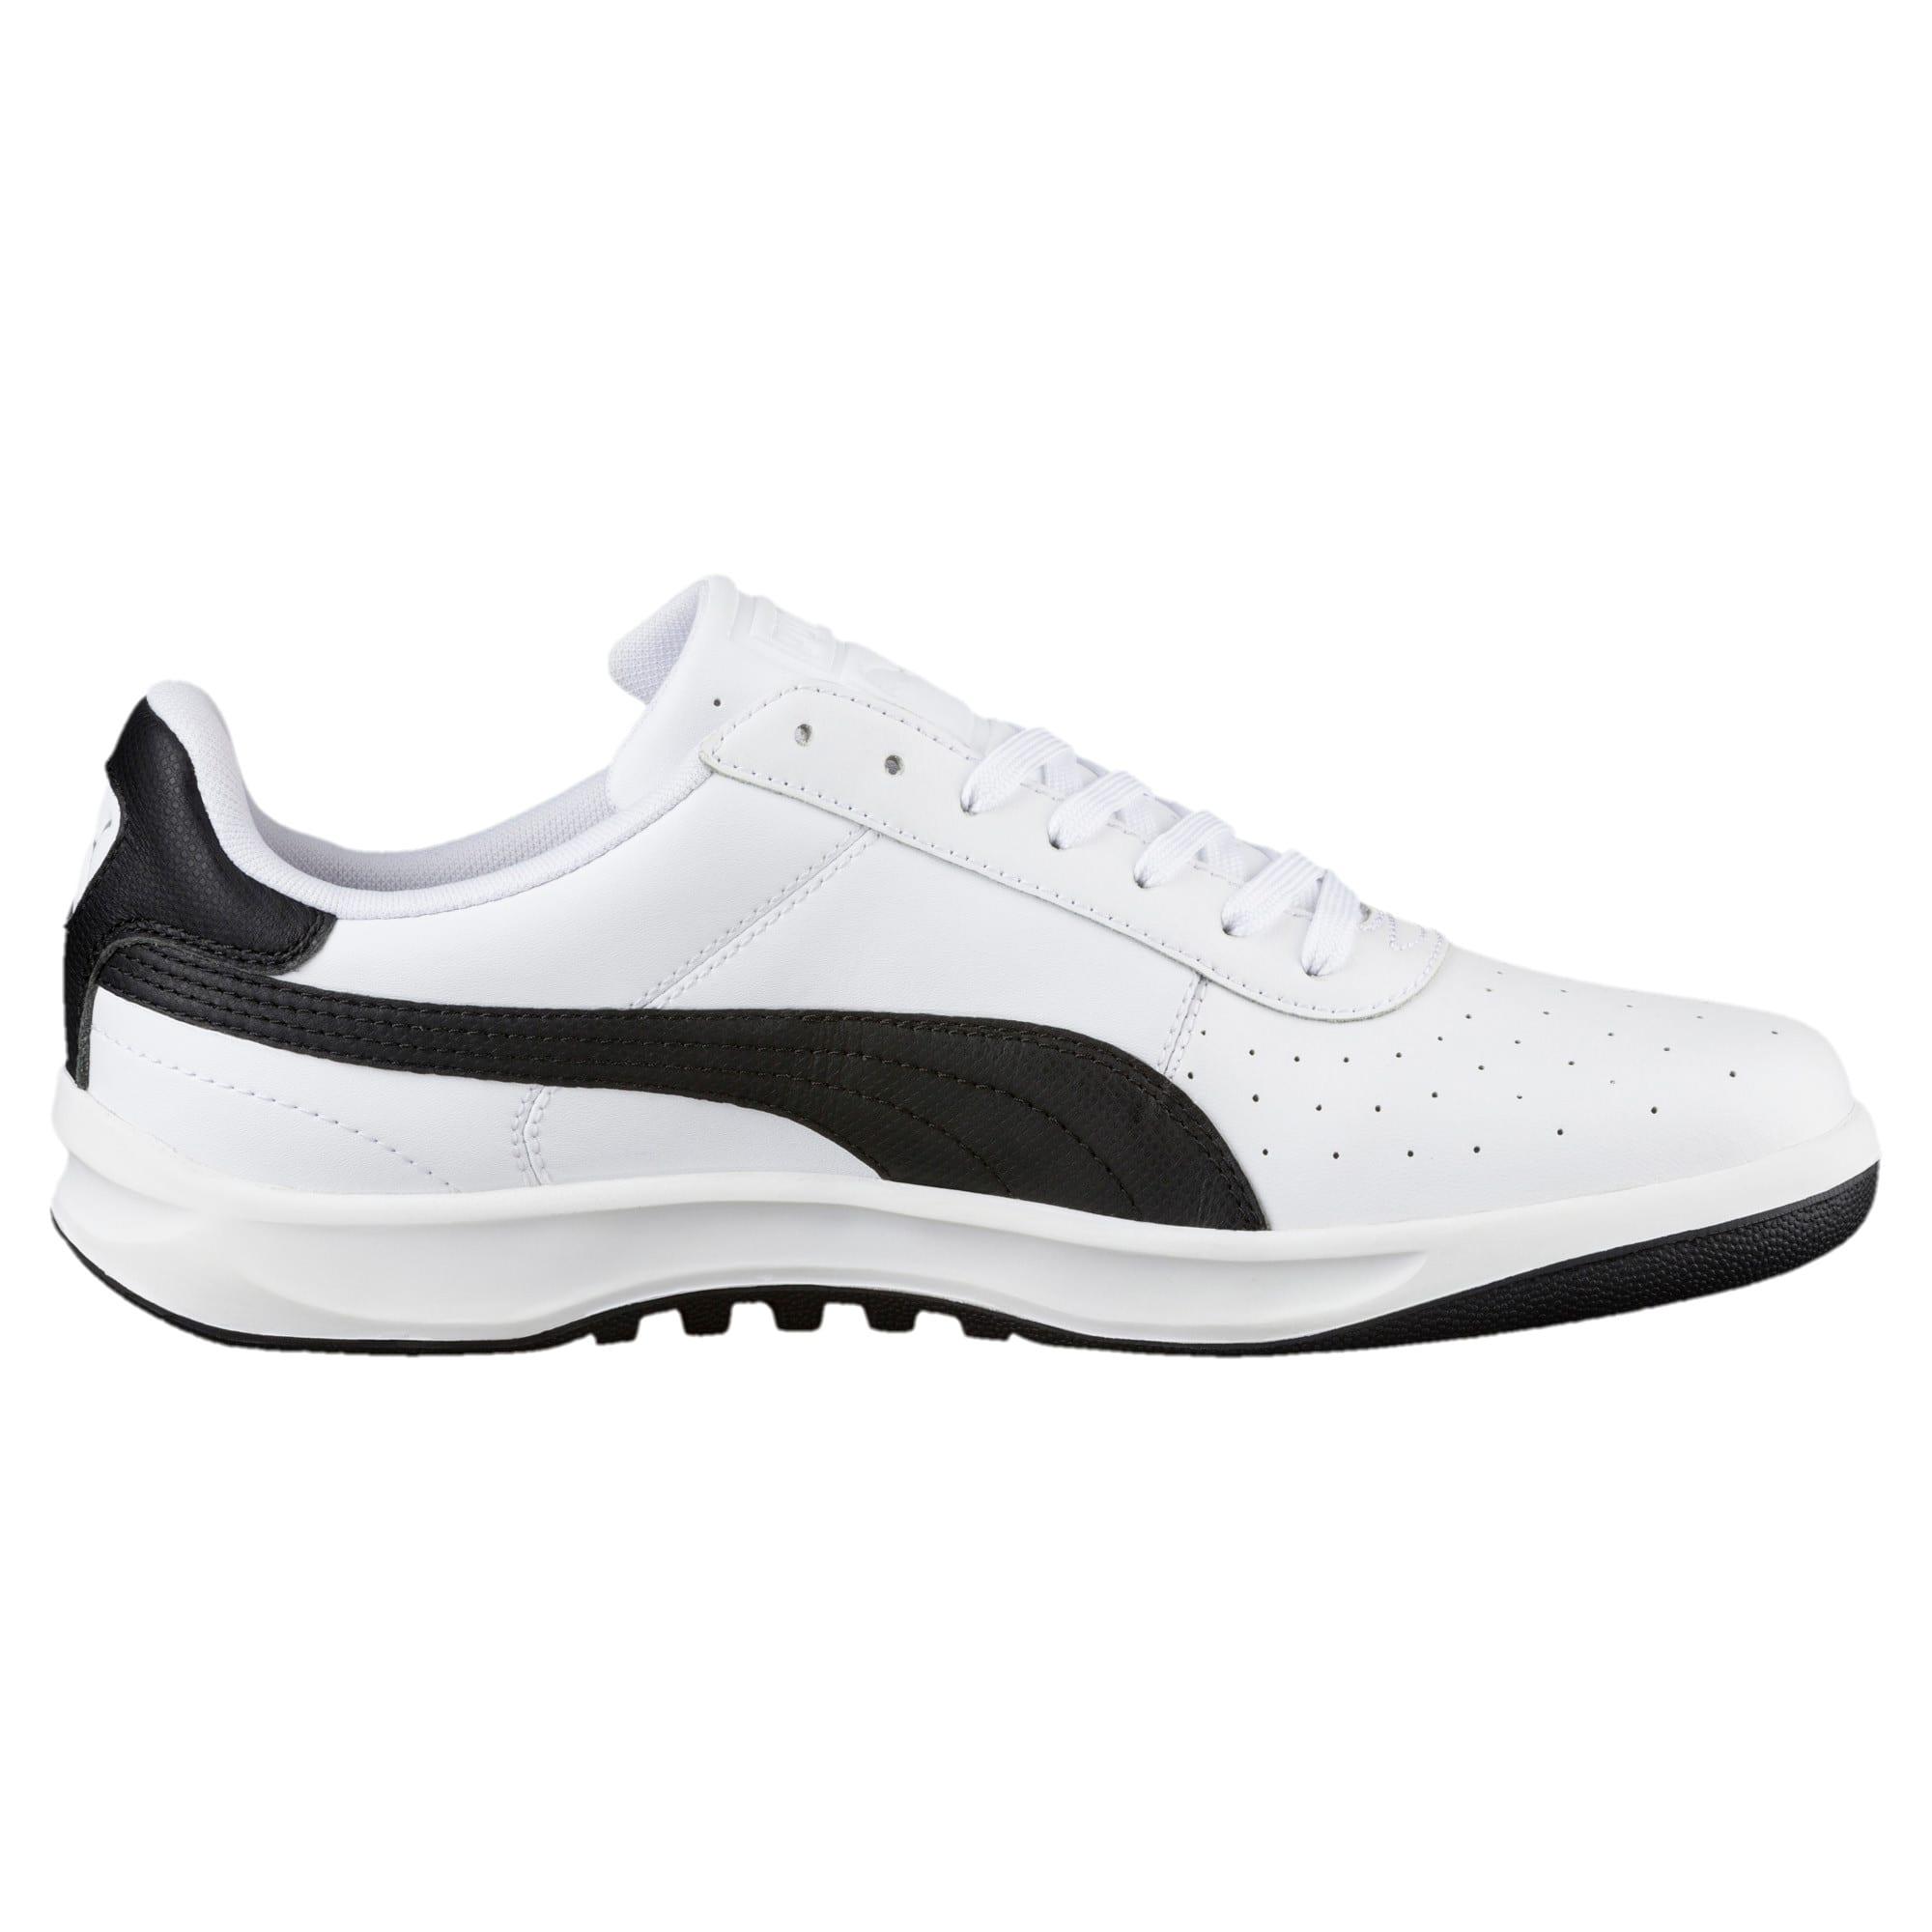 PUMA Leather G. Vilas 2 Men's Sneakers in White for Men - Lyst